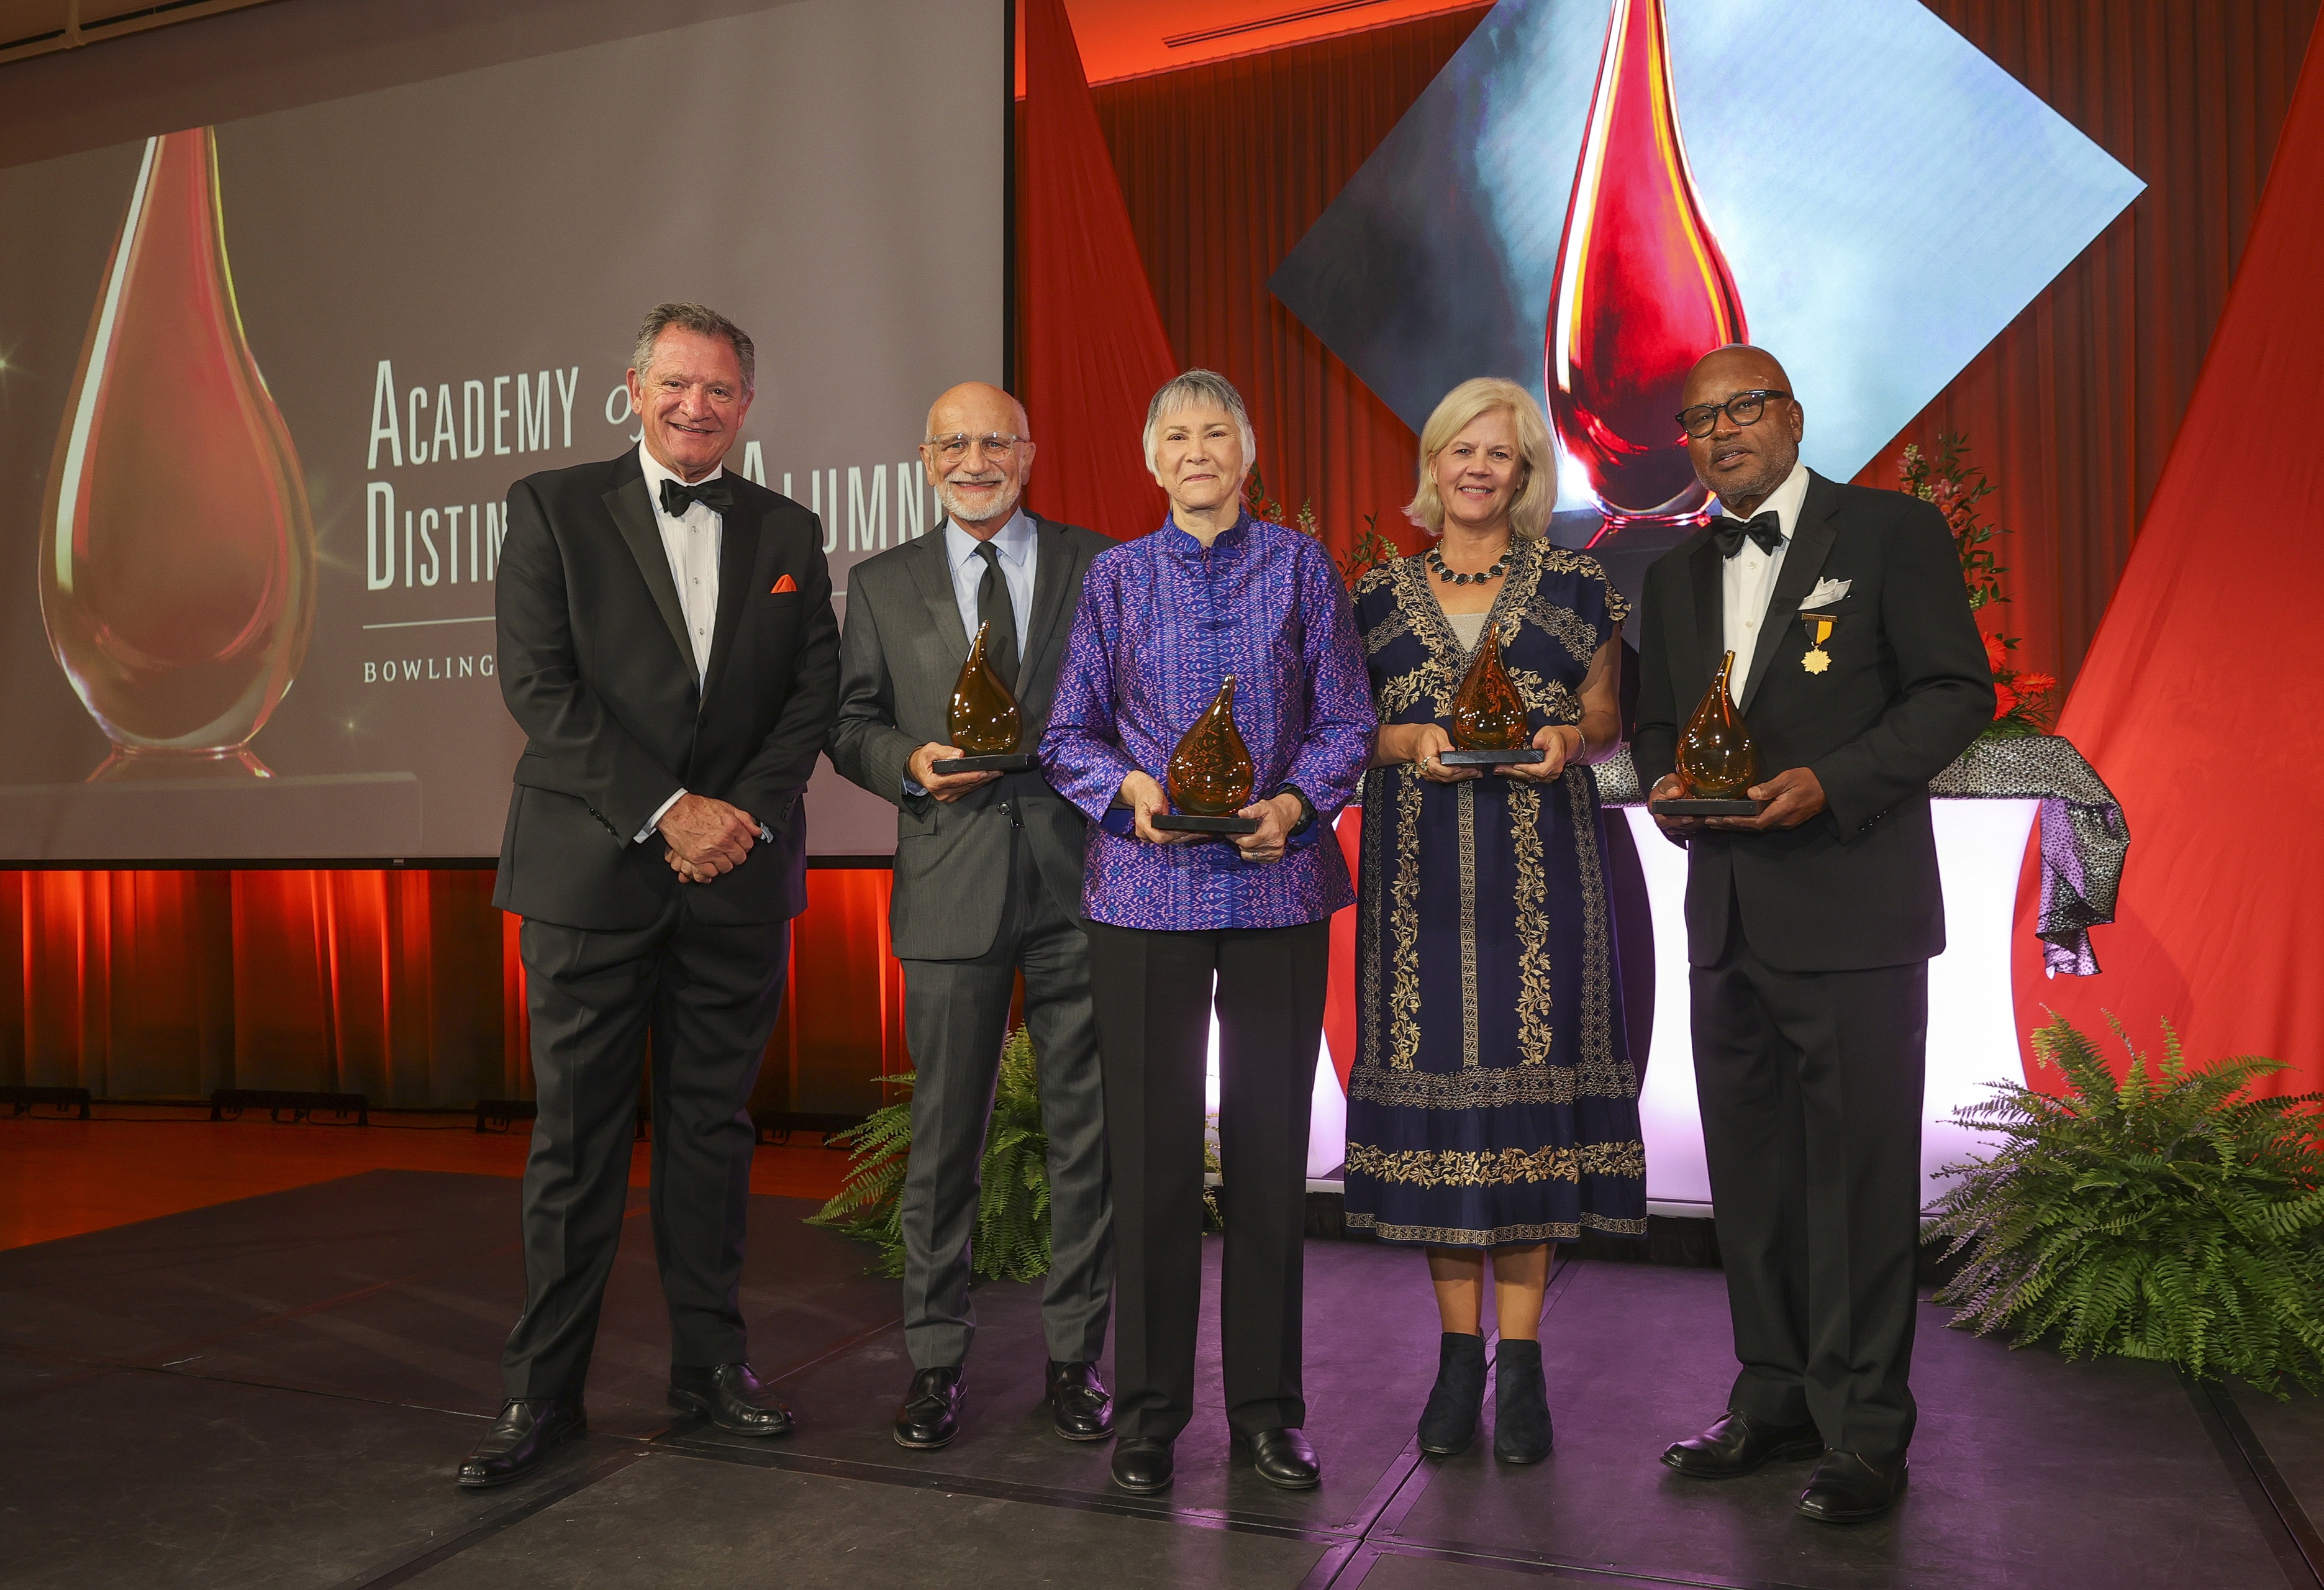 BGSU President Rodney K. Rogers poses with Academy of Distinguished Alumni inductees Dr. Anthony "Tony" Rucci, '72, '76, '78; Brenda J. Hollis, '68, '14 (Hon.); Beth Macy, '86; and Clarence Albert Daniels Jr., '71, '73. 